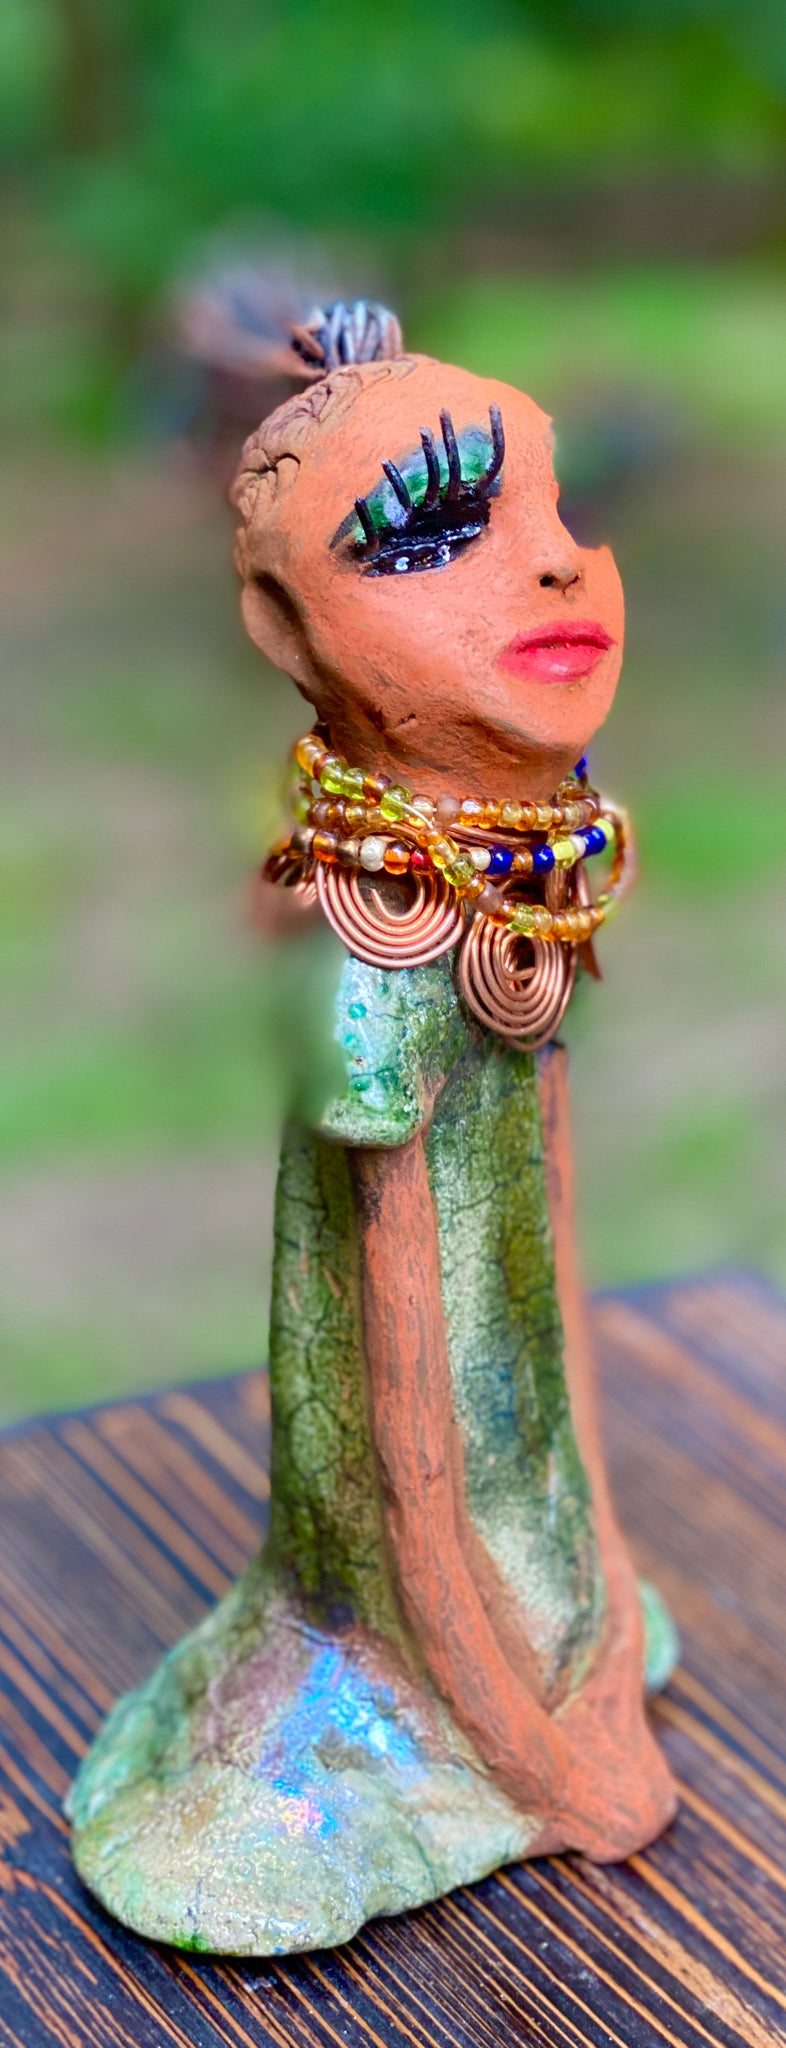  Kaleesia says yes to wire hair and yes to the Herdew tribe.  Kaleesia stands 9” x 5" x 2.5" and weighs 1.05 lbs.  She has a lovely beige brown complexion with short etched braided clay hair.   Kaleesia  long loving arms rest beside her multicolored copper green dress.  Kaleesia is a sophisticated lady that will grace your home.